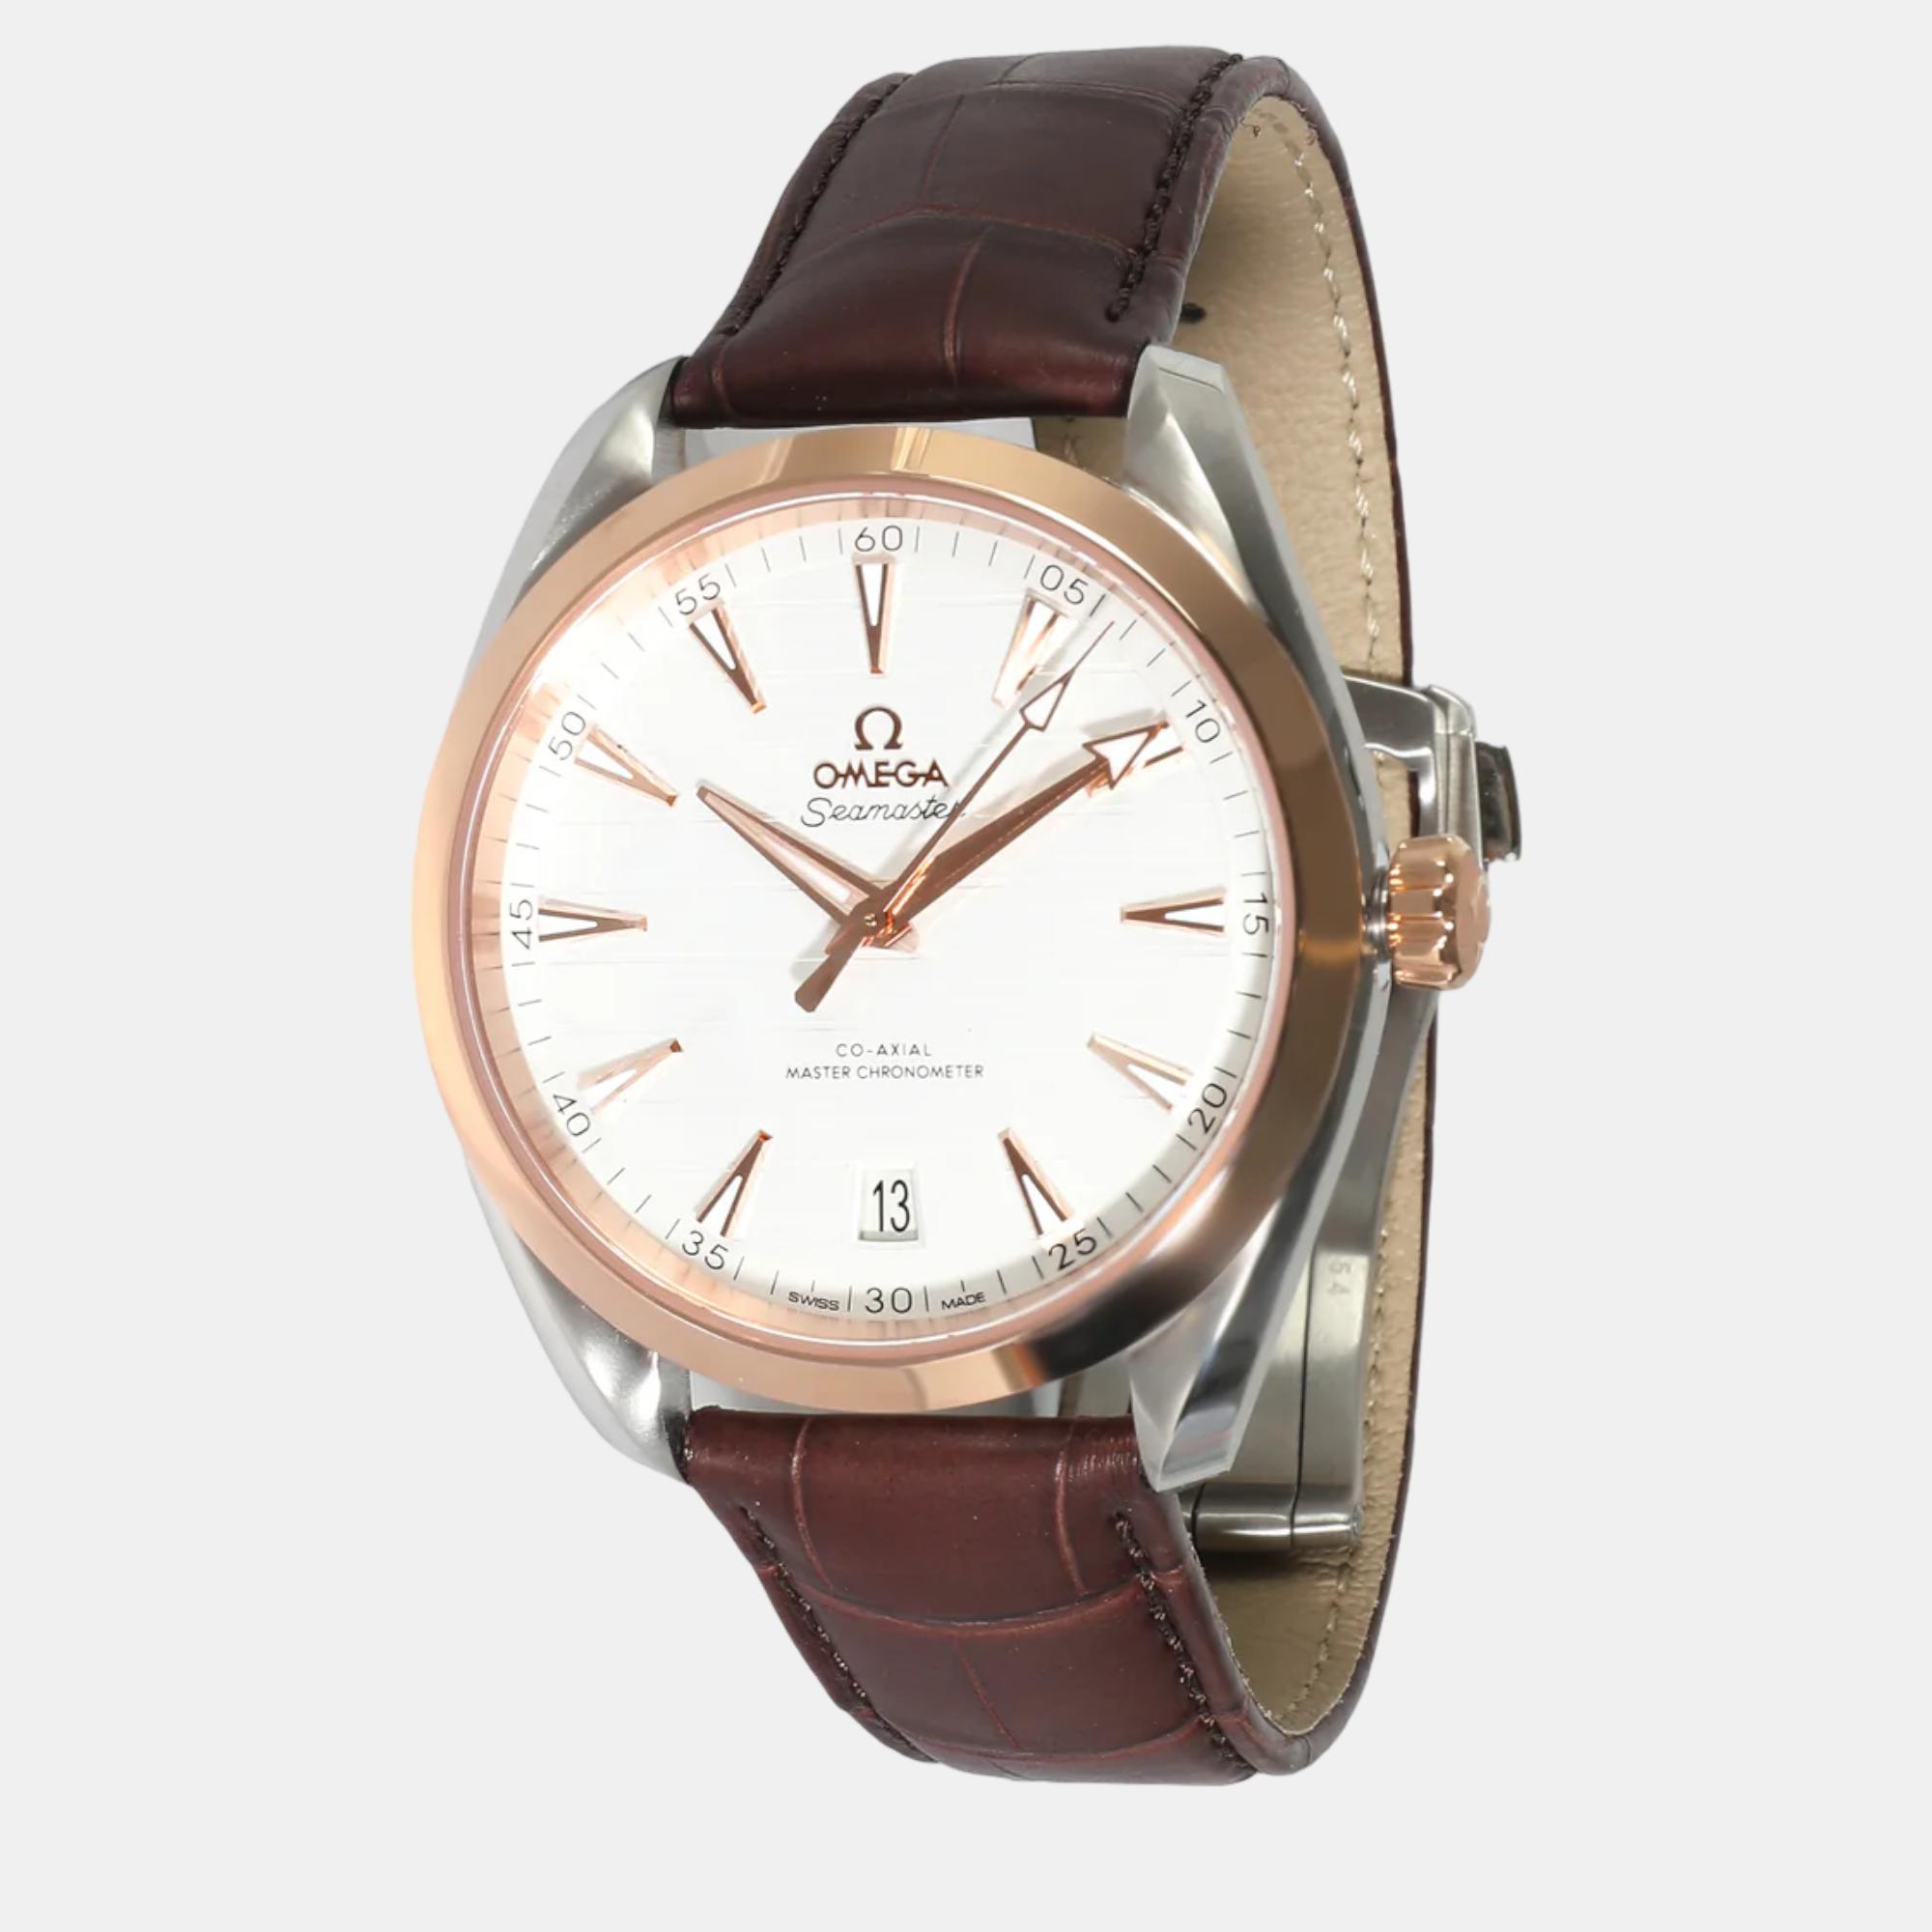 Omega silver 18k rose gold stainless steel seamaster aqua terra 220.23.41.21.02.001 automatic men's wristwatch 41 mm